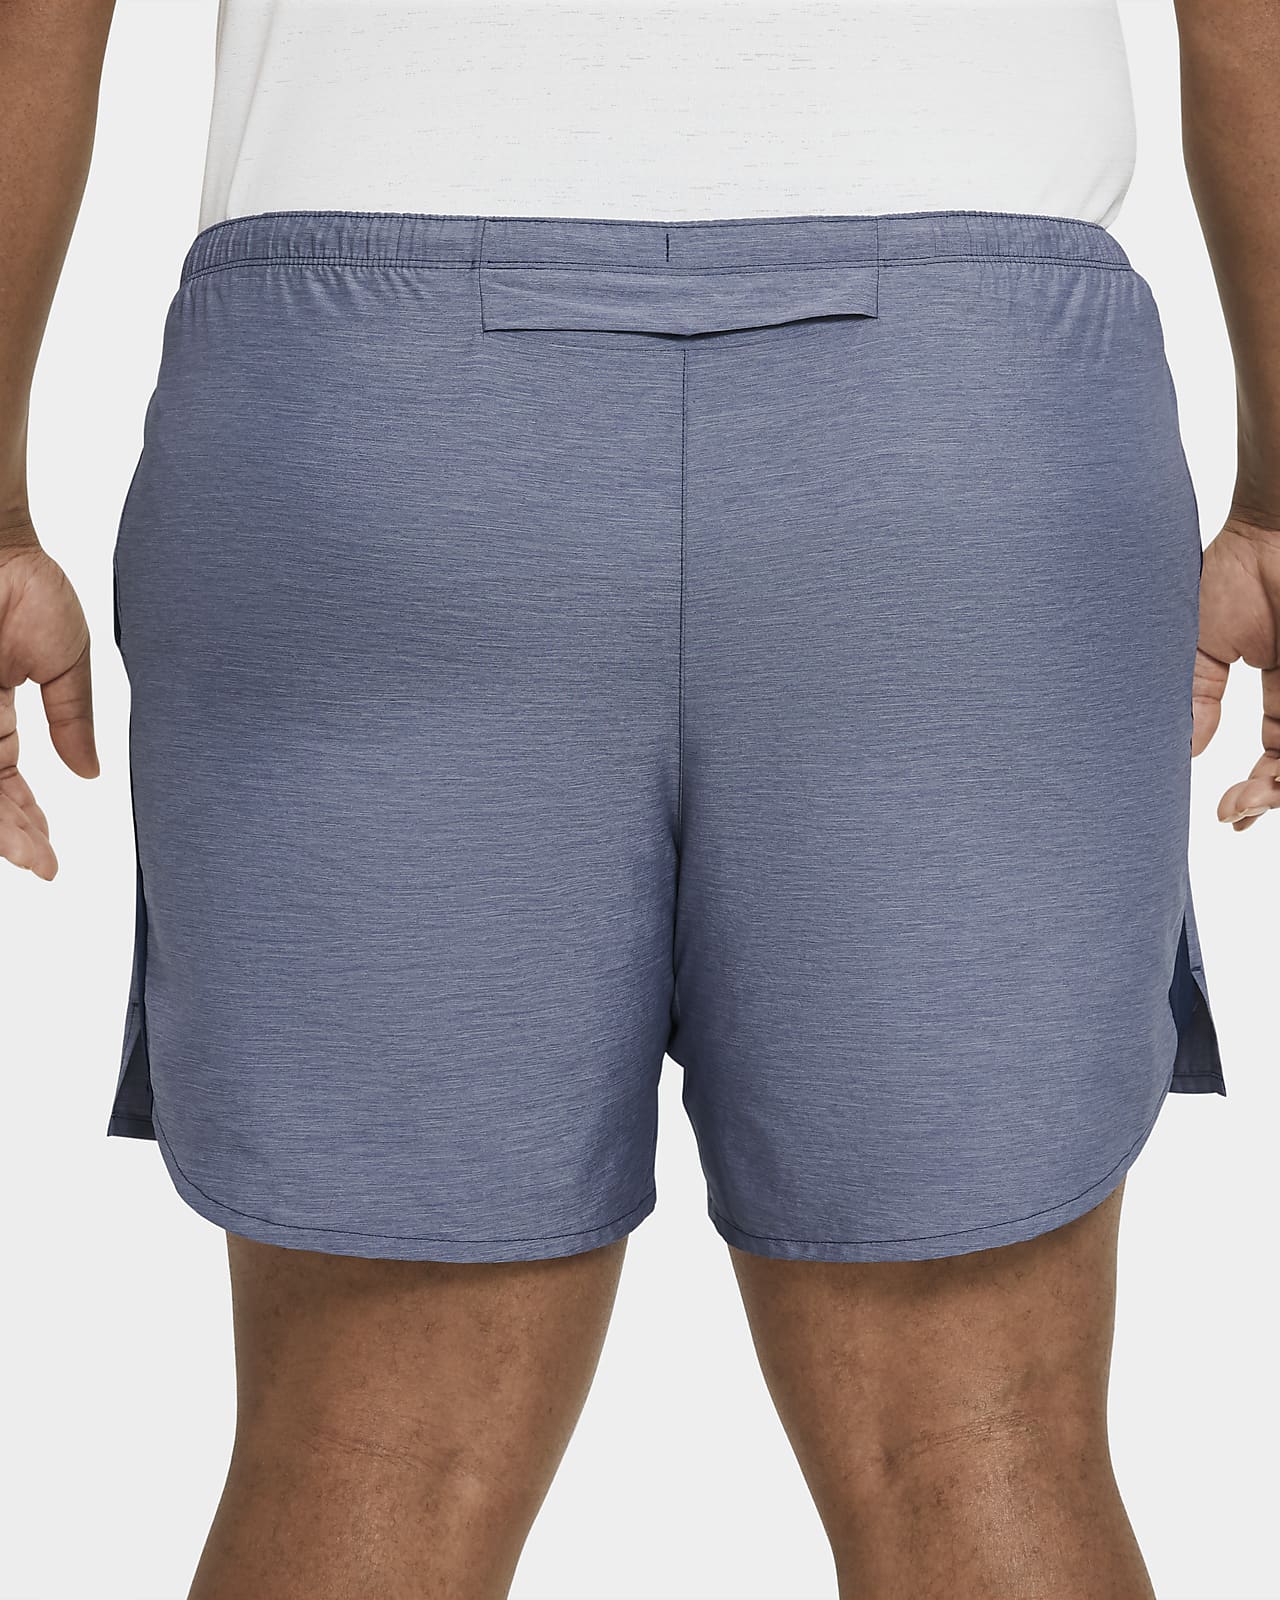 nike shorts with inner brief